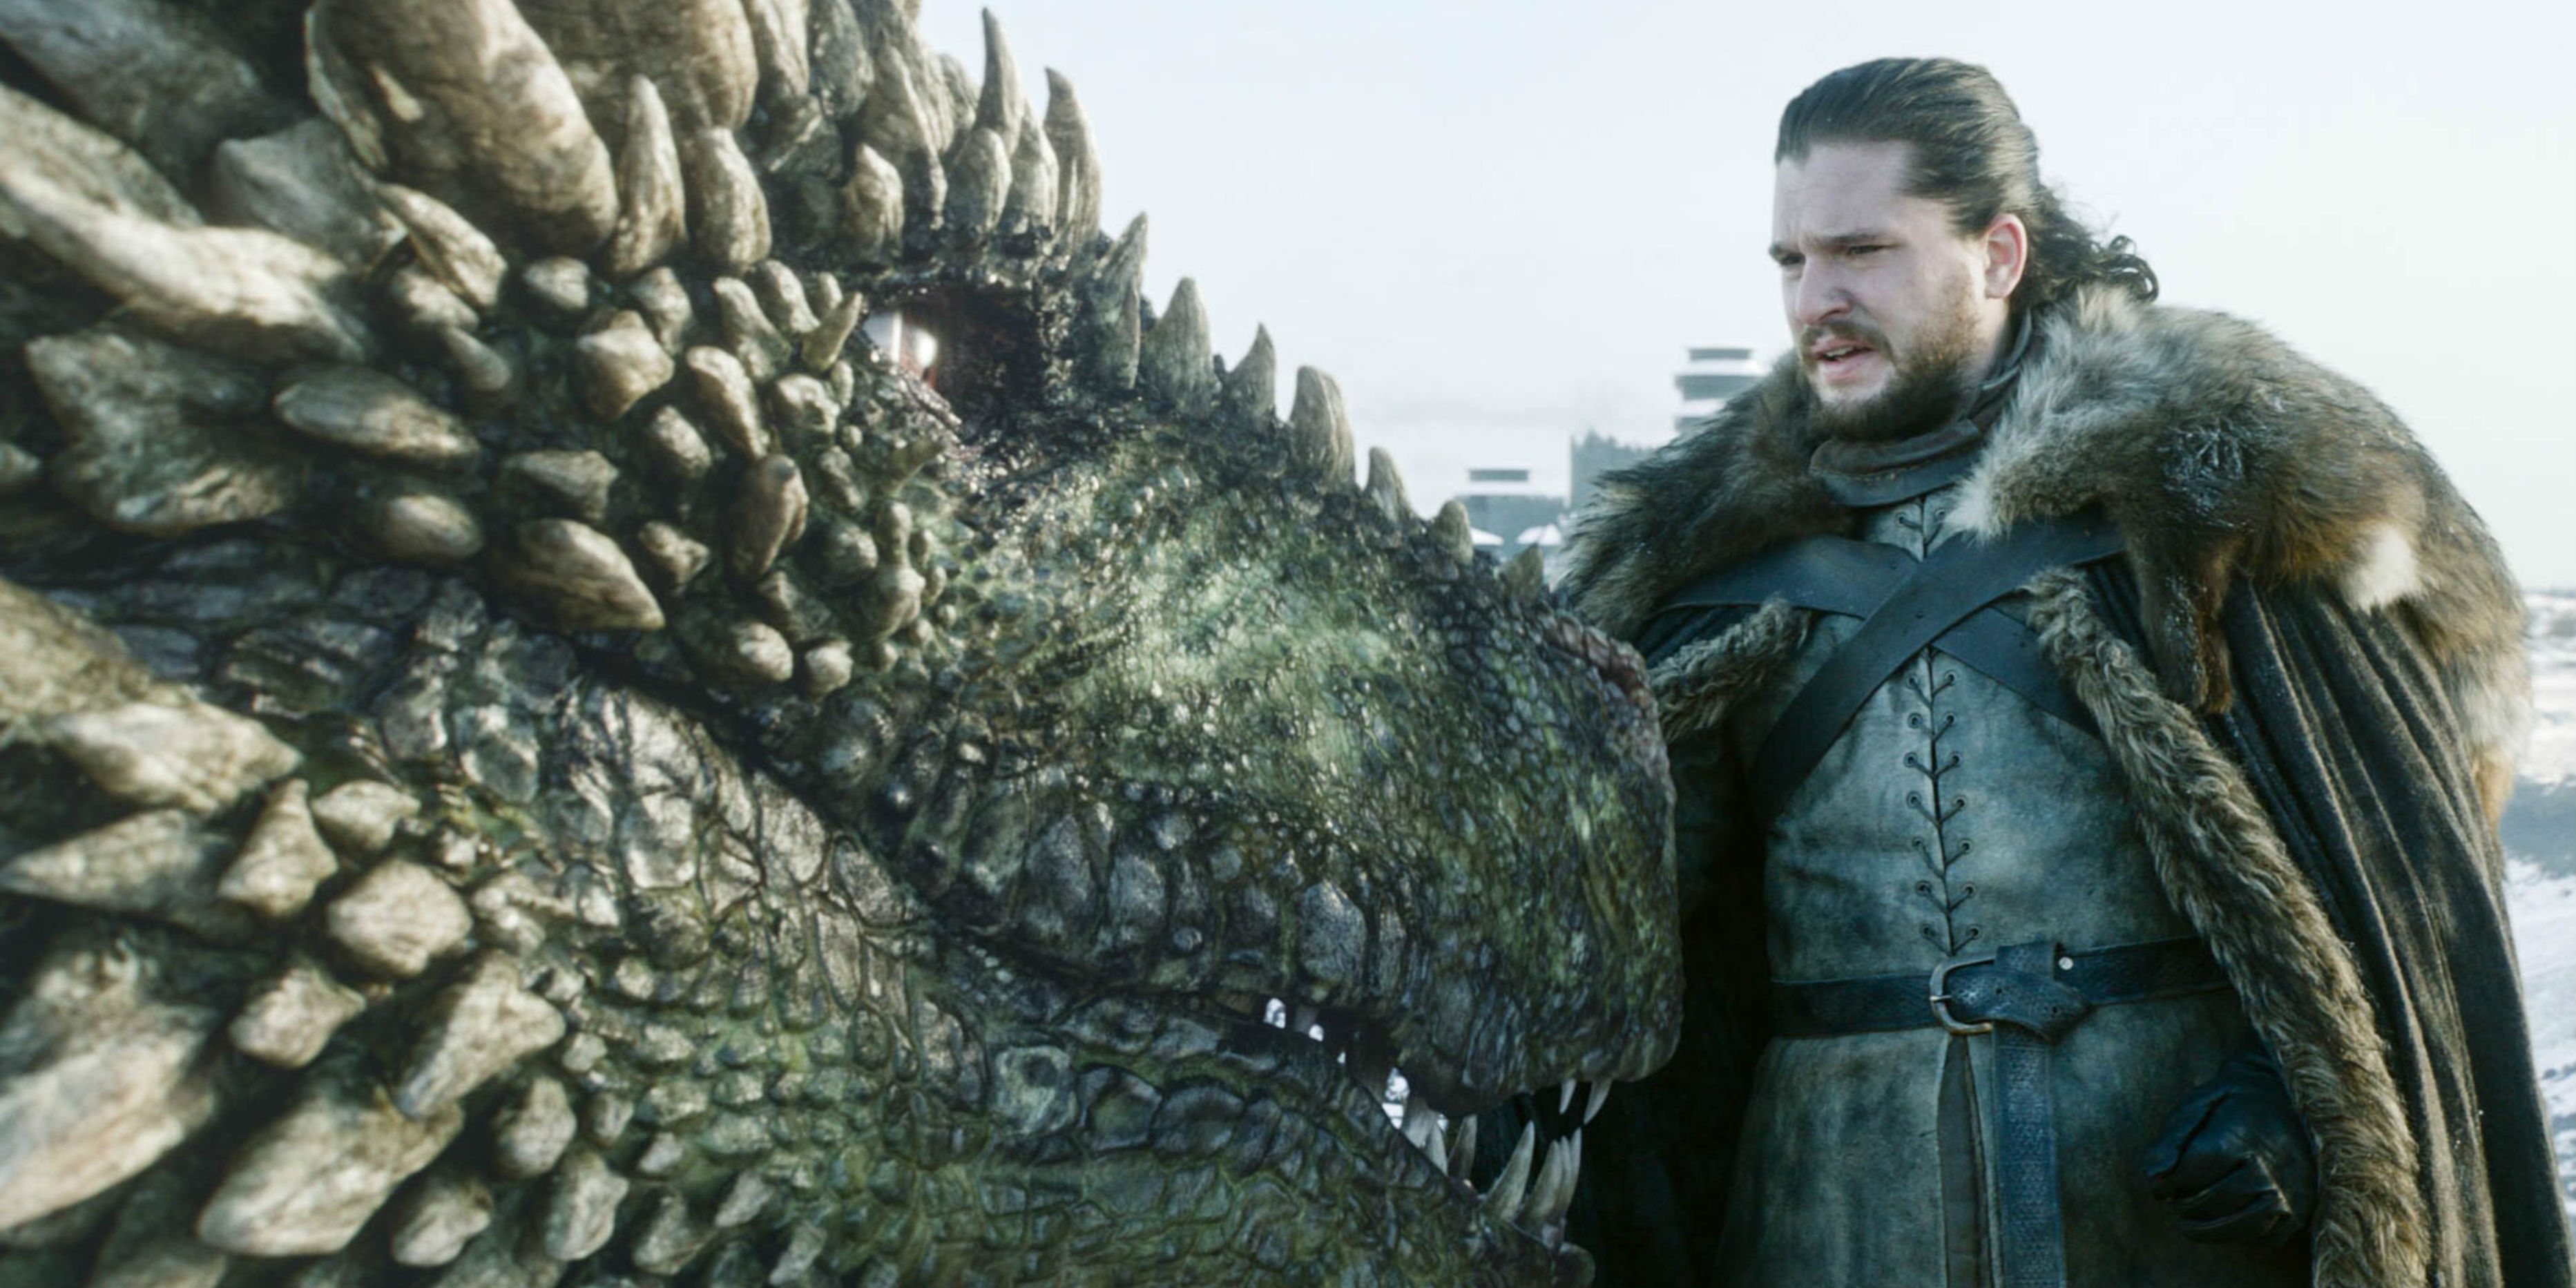 Jon and Rhaegal on Game of Thrones